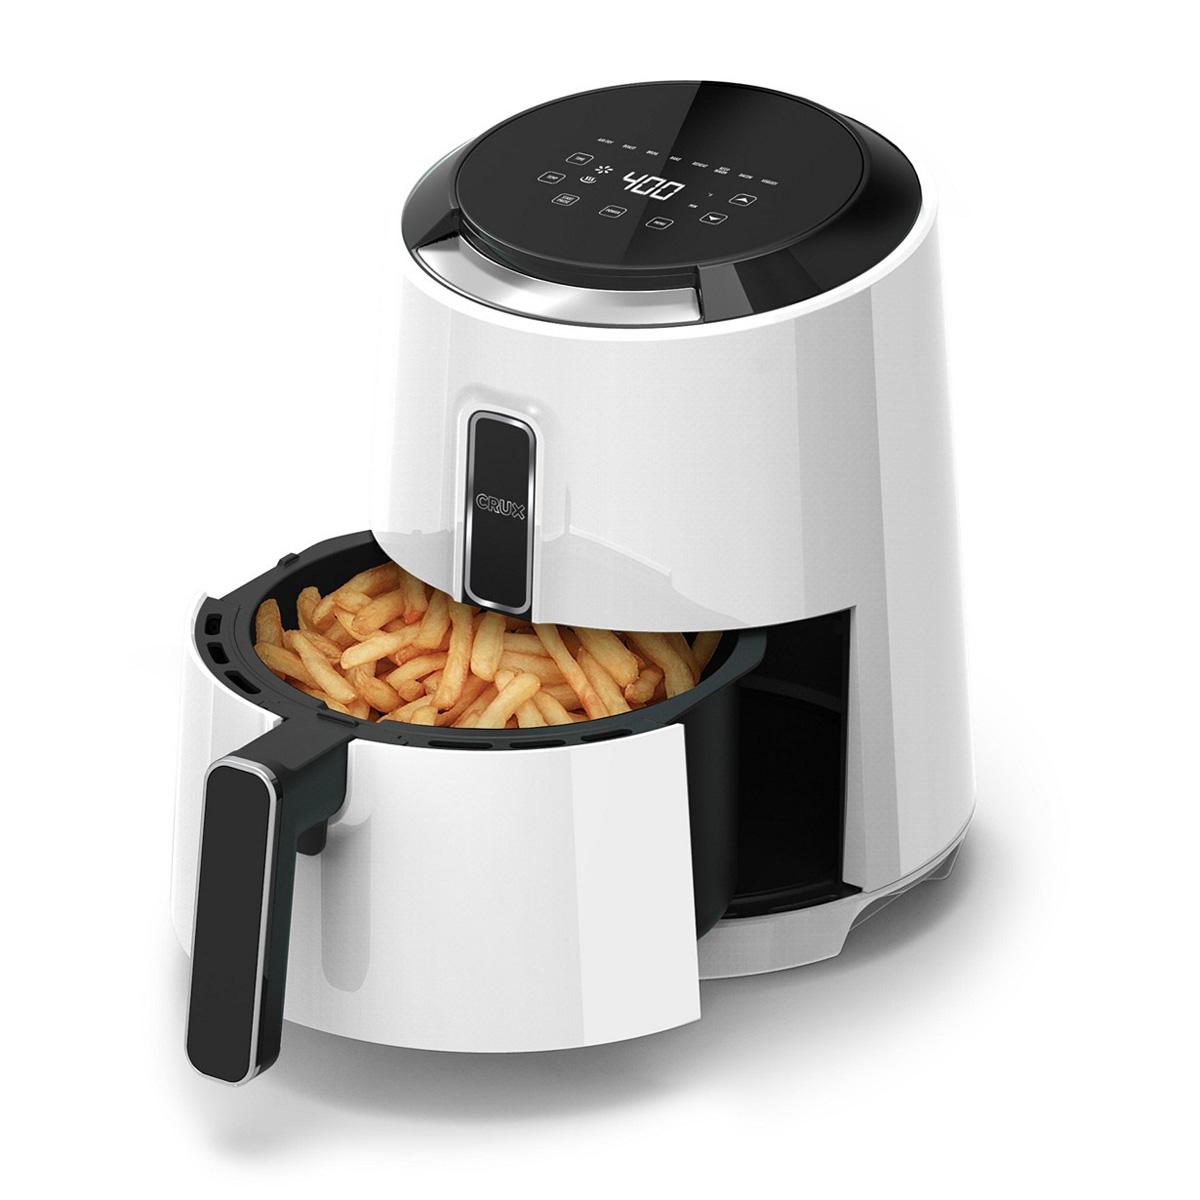 Crux 3.7Q Touchscreen Electric Air Fryer for $39.99 Shipped